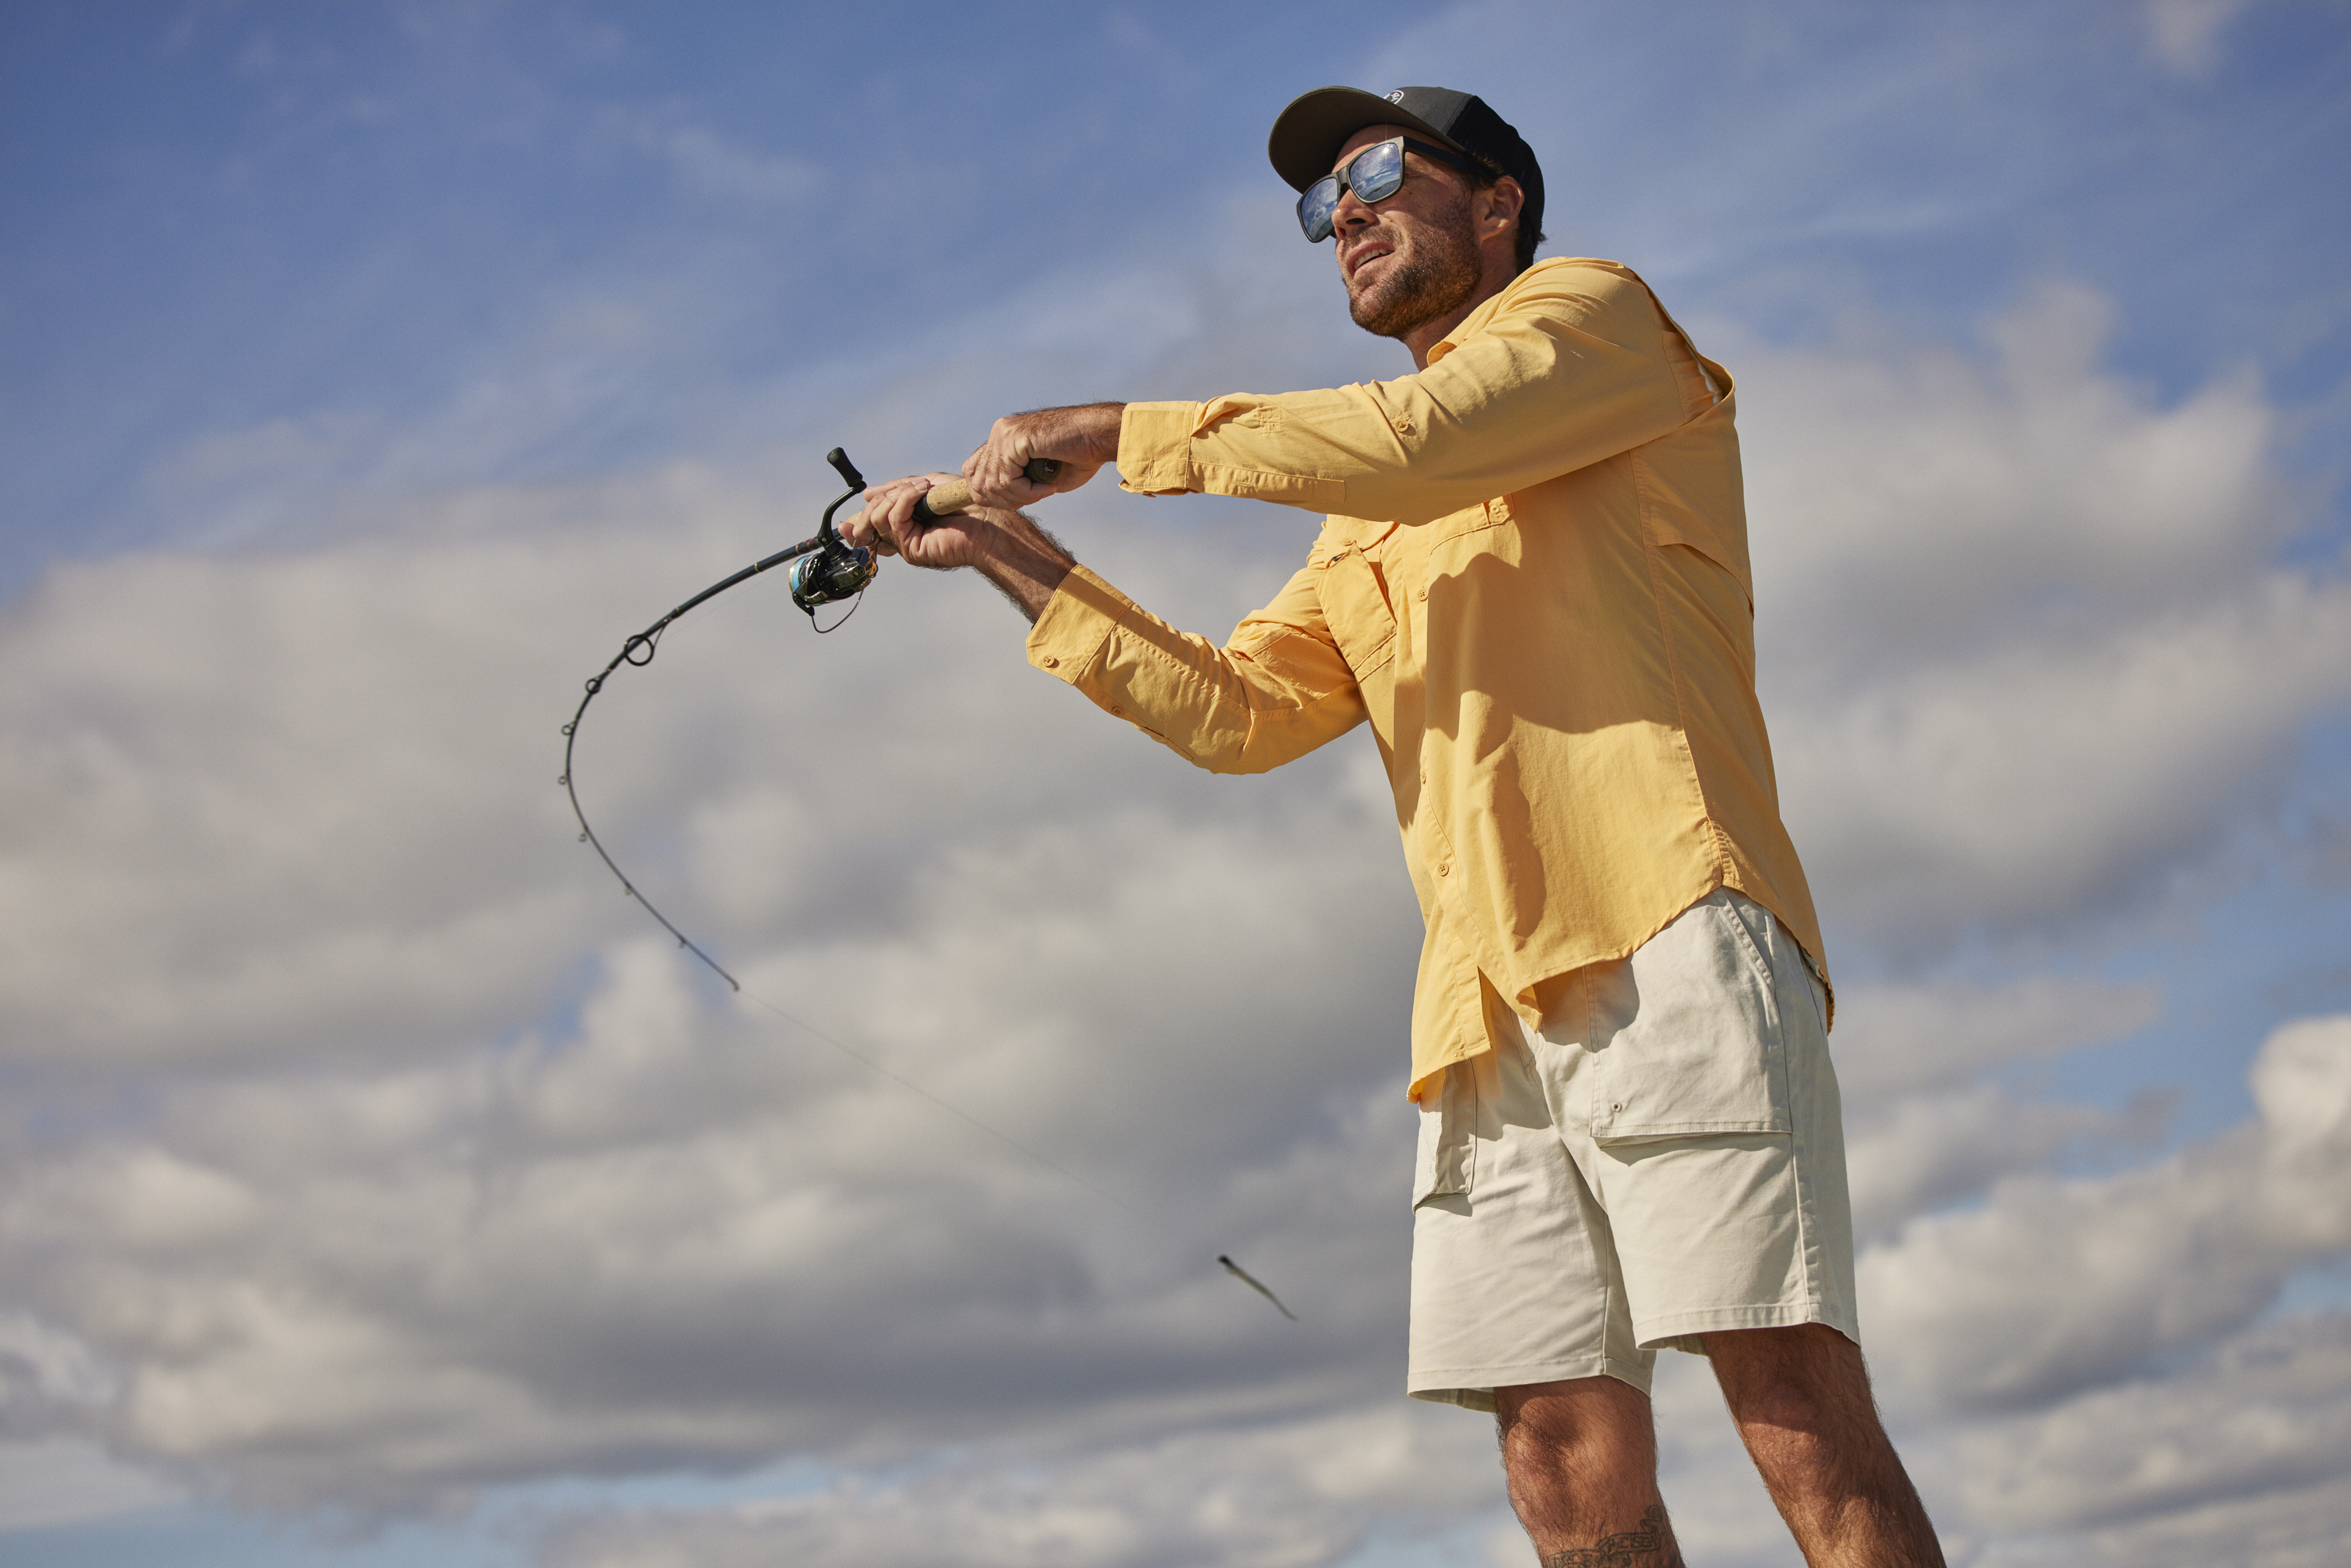 Wrangler® Reels in Fishing Styles with New ATG Wrangler AnglerTM Collection  and Will Serve as the Official Sponsor of the Major League Fishing Bass Pro  Tour in 2022 | Business Wire